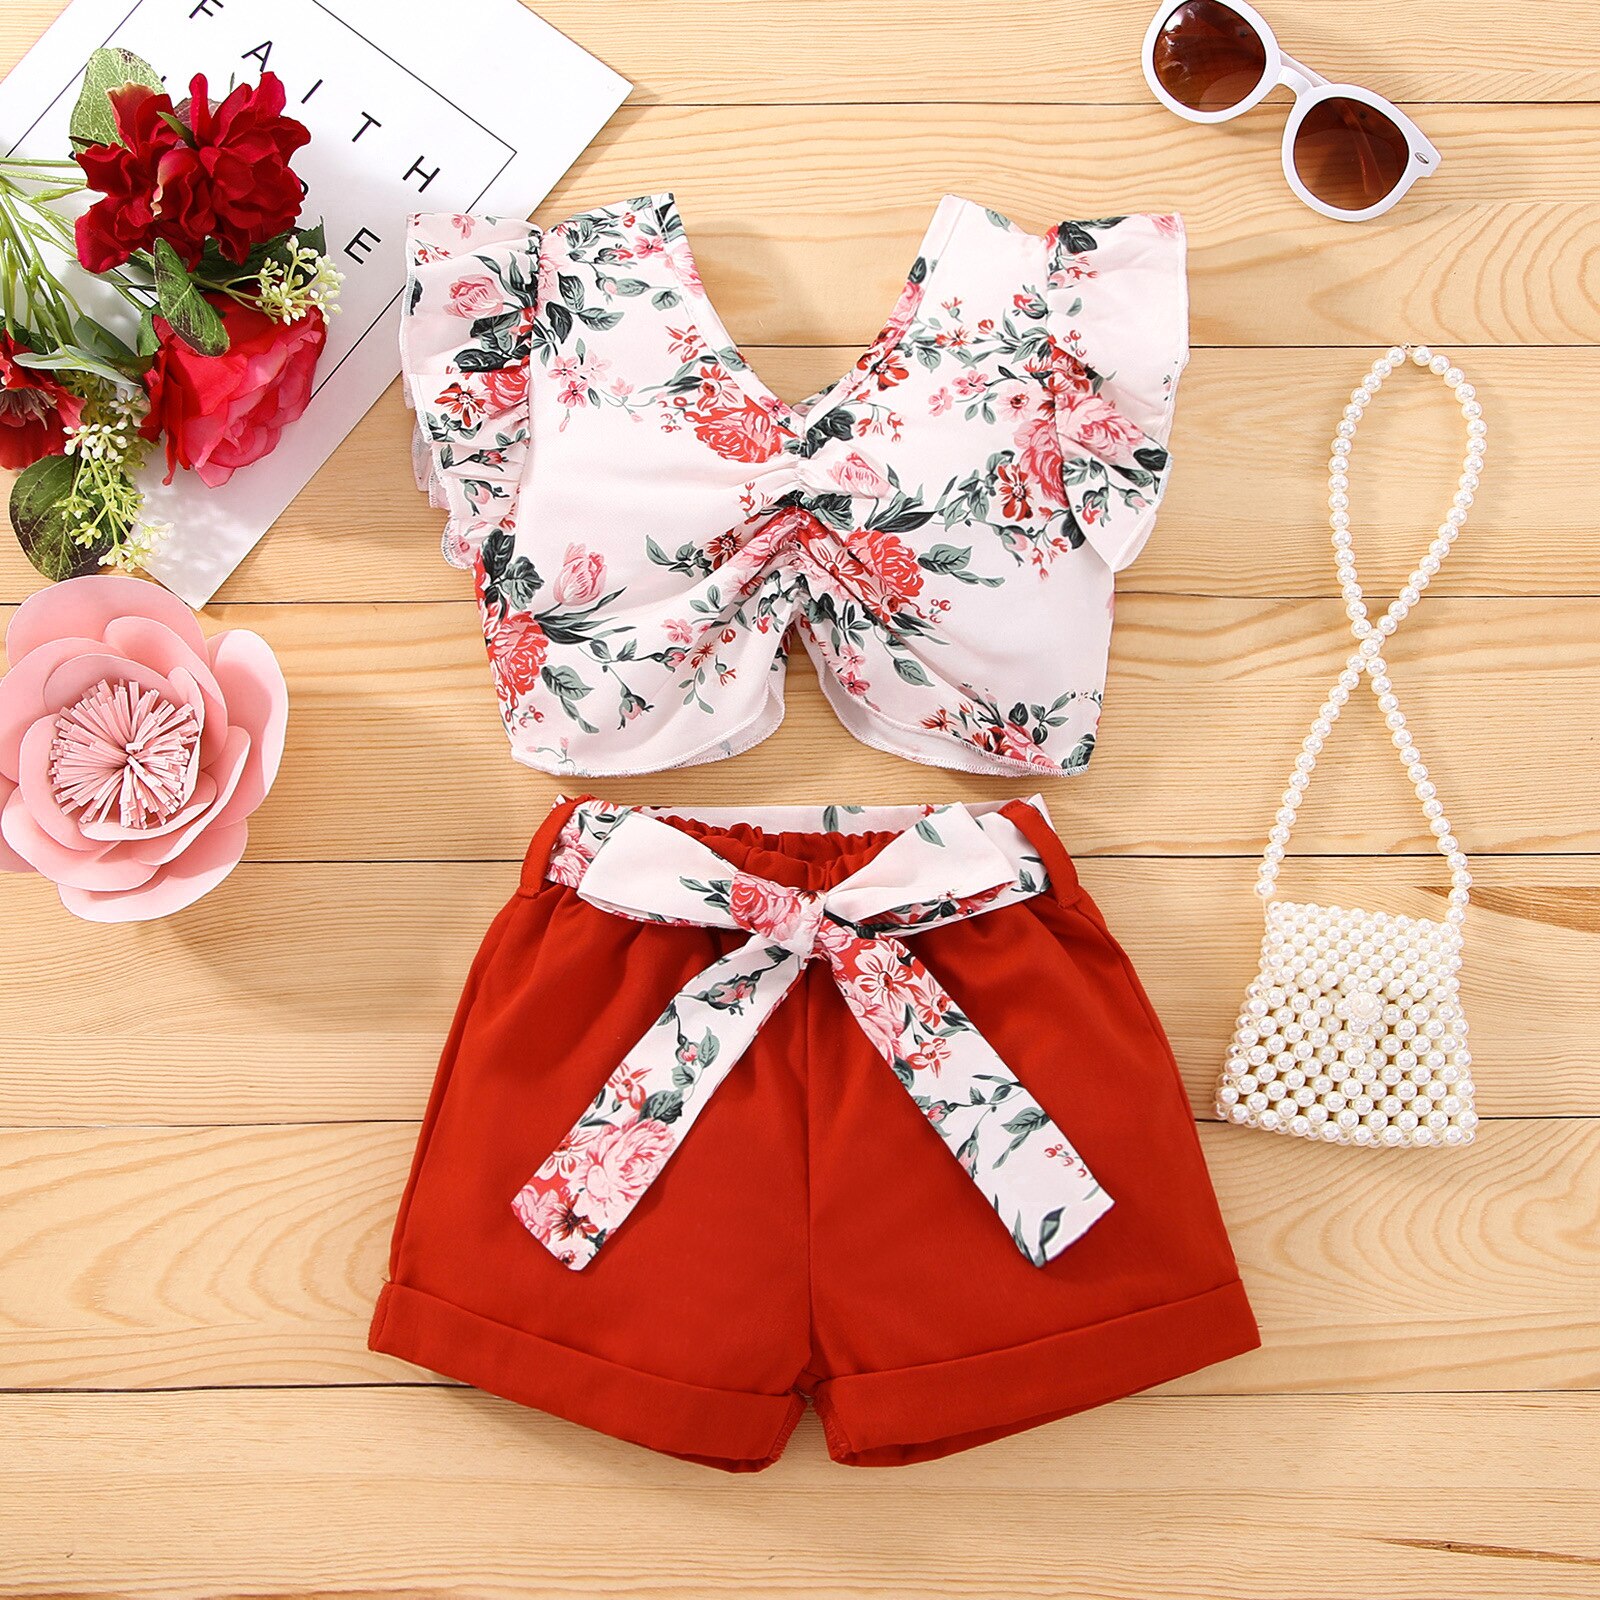 Summer-Newborn-Baby-Girl-Clothes-Set-Children-s-Floral-Short-Sleeve-Top-Shorts-Kid-Outfits-Sets-2